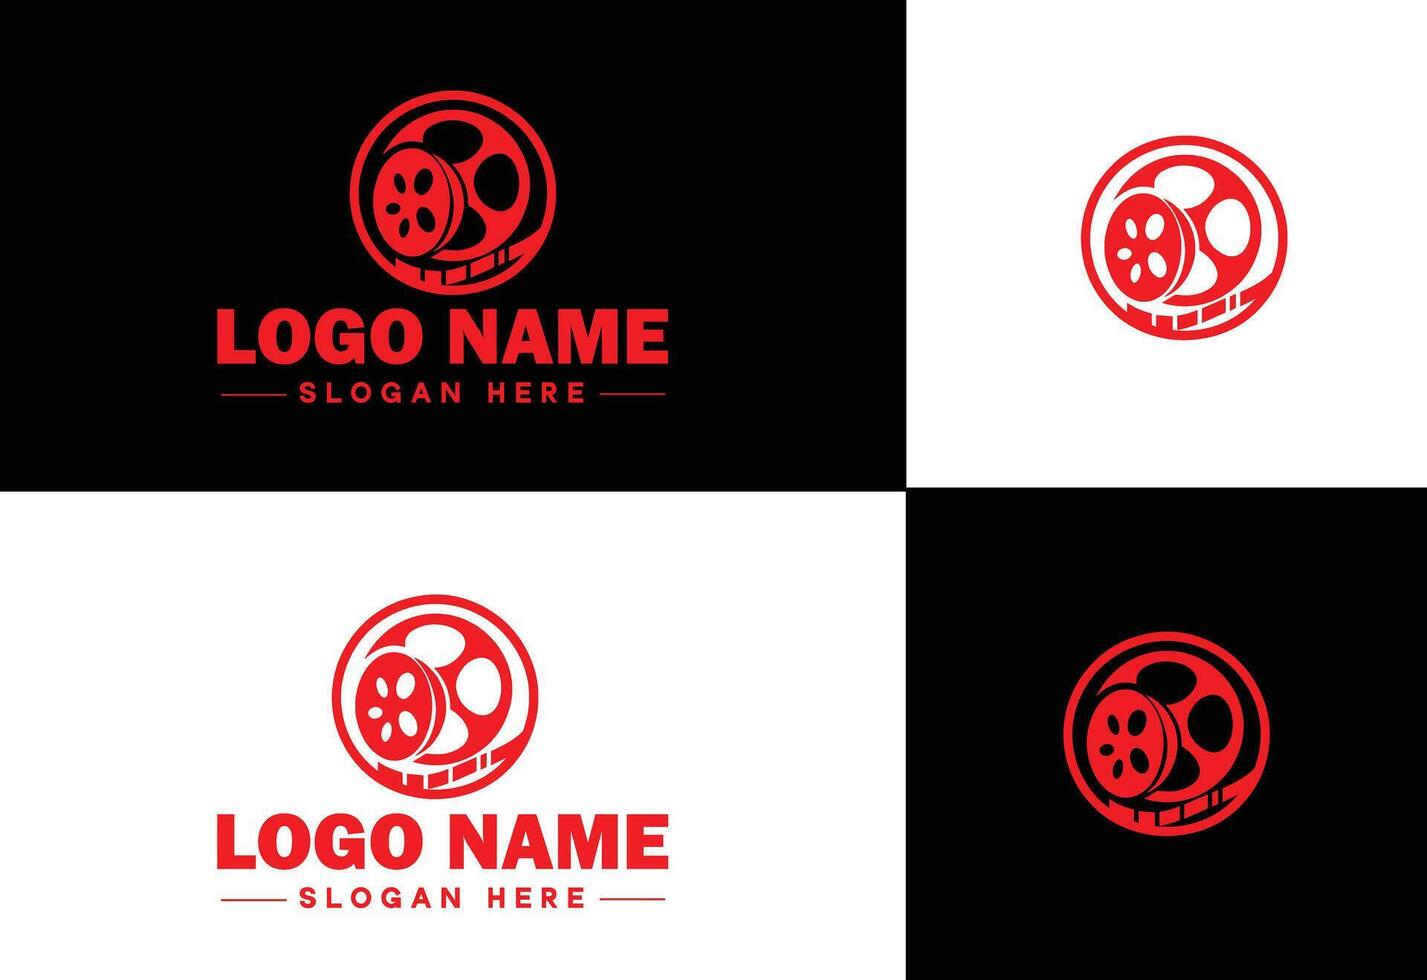 film reel logo icon vector for business brand app icon movie cinema theater video channel cinematography logo template